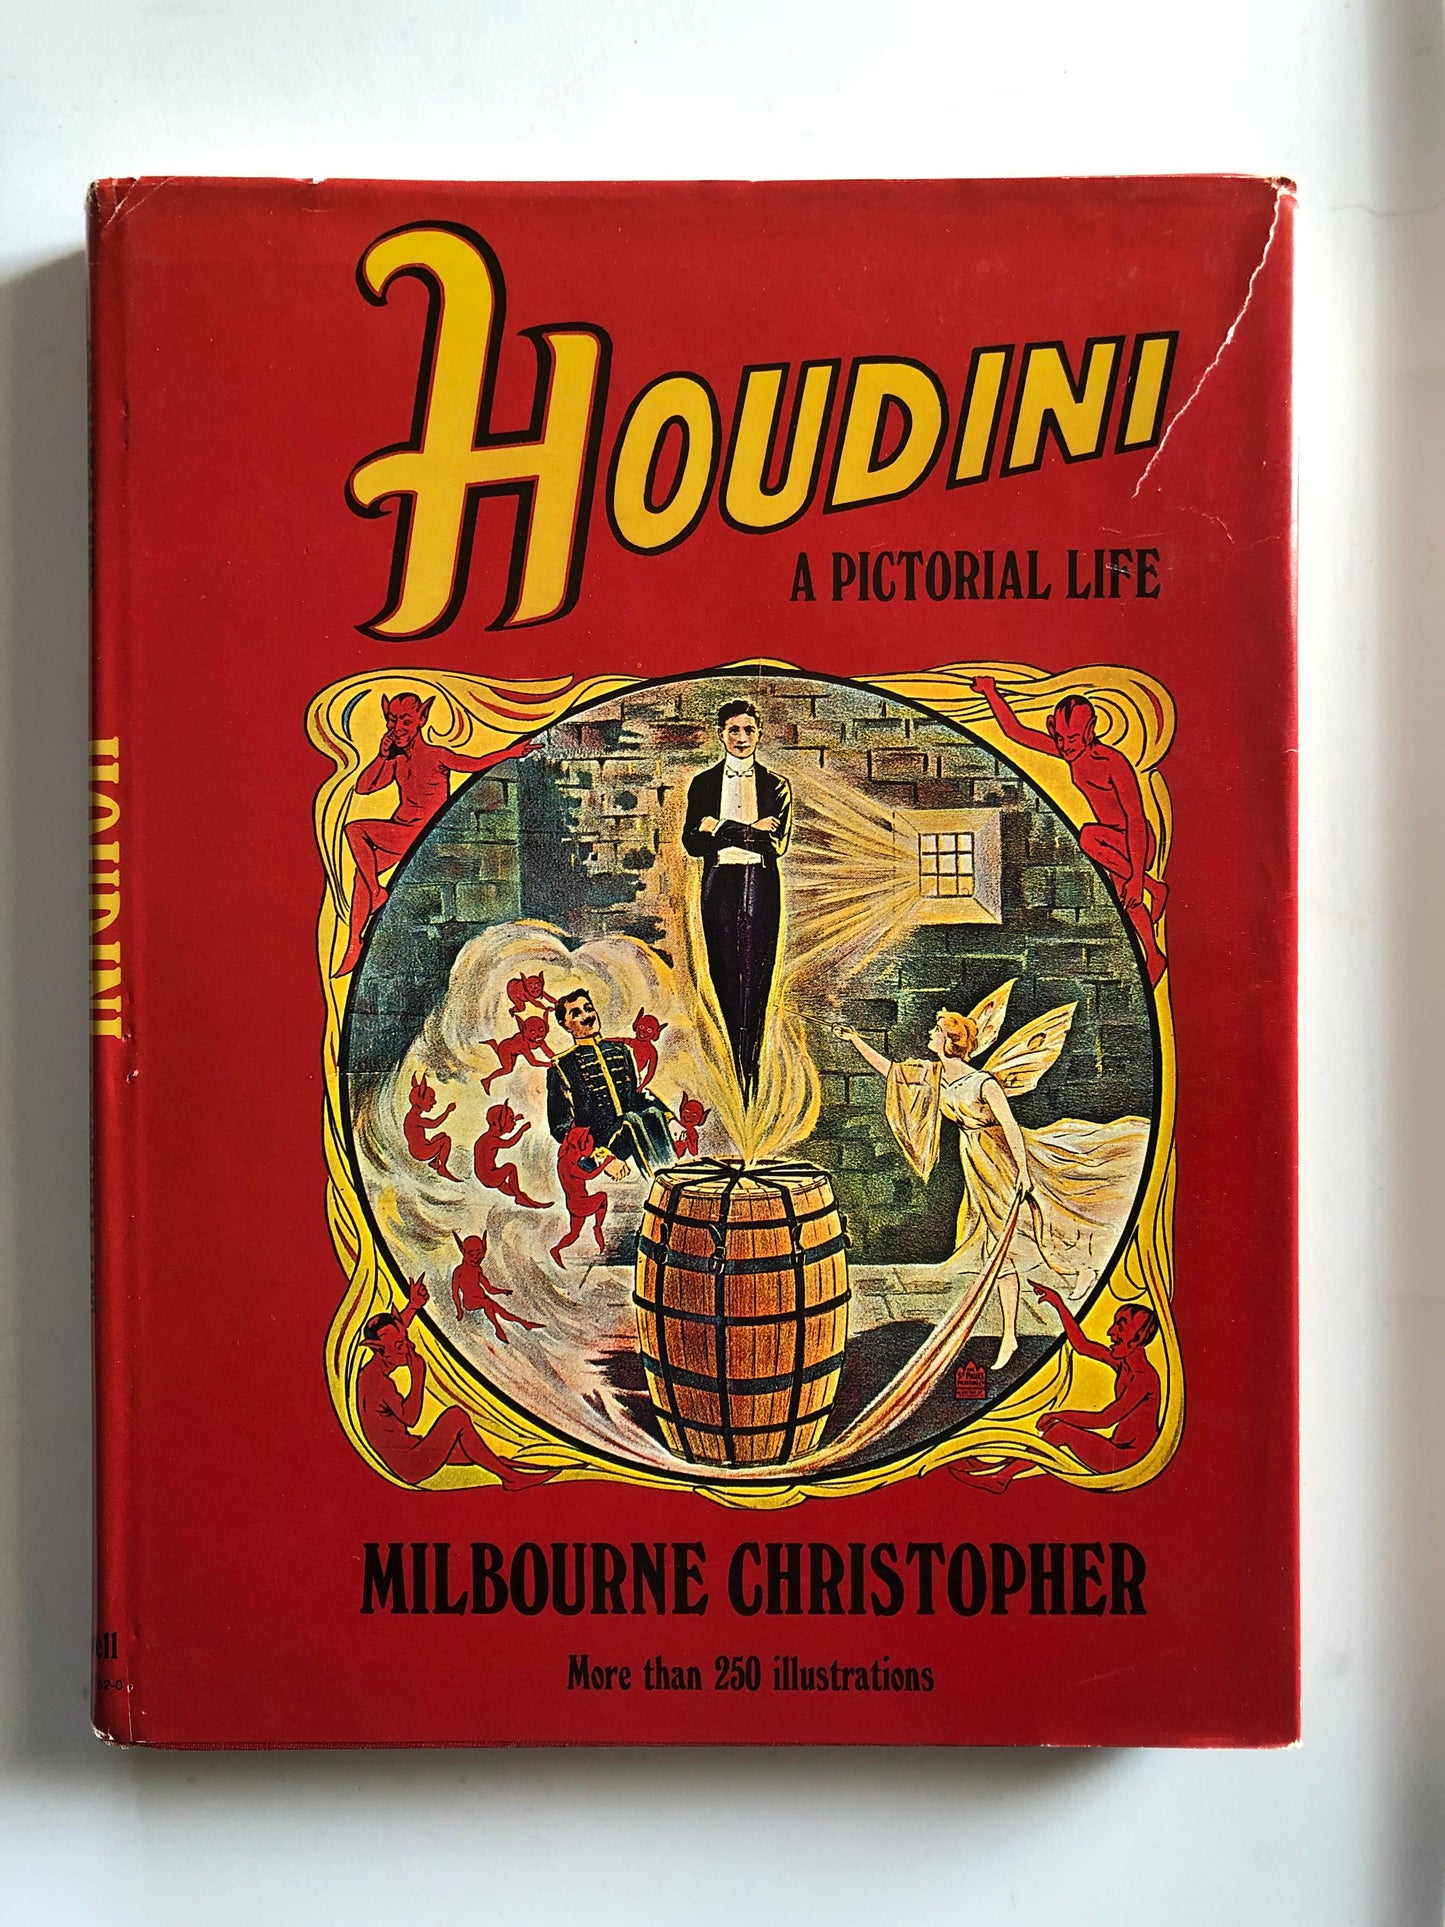 Houdini, A Pictorial Life - Milbourne Christopher